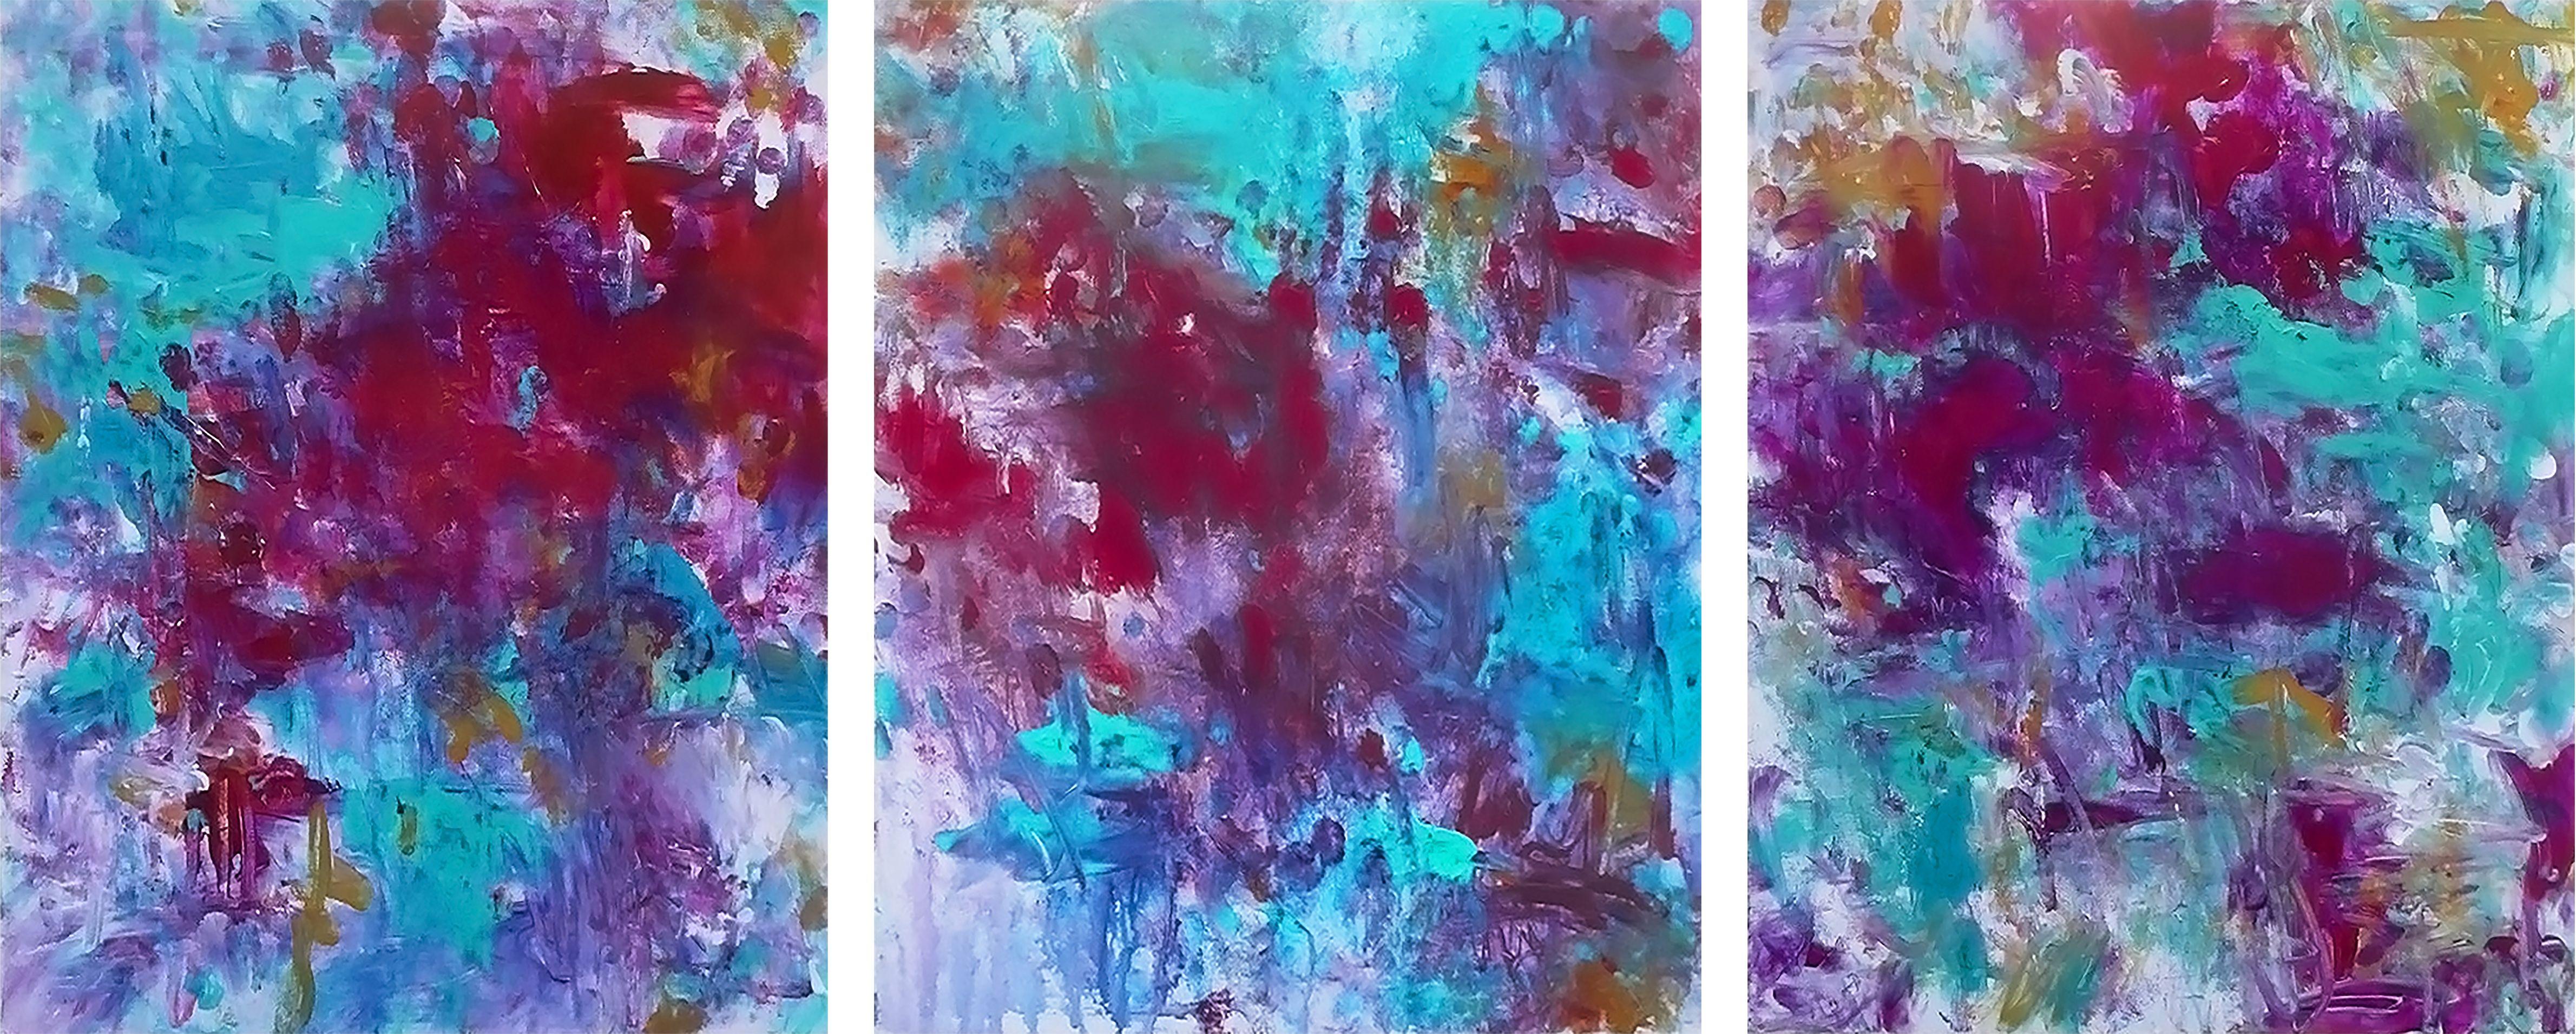 The paintings that I create are meant to inspire and uplift, as well as enhance your interiors. I believe that our homes should be sanctuaries that surrounds us with comfort, color, beauty and the things we love. If you feel an emotional connection